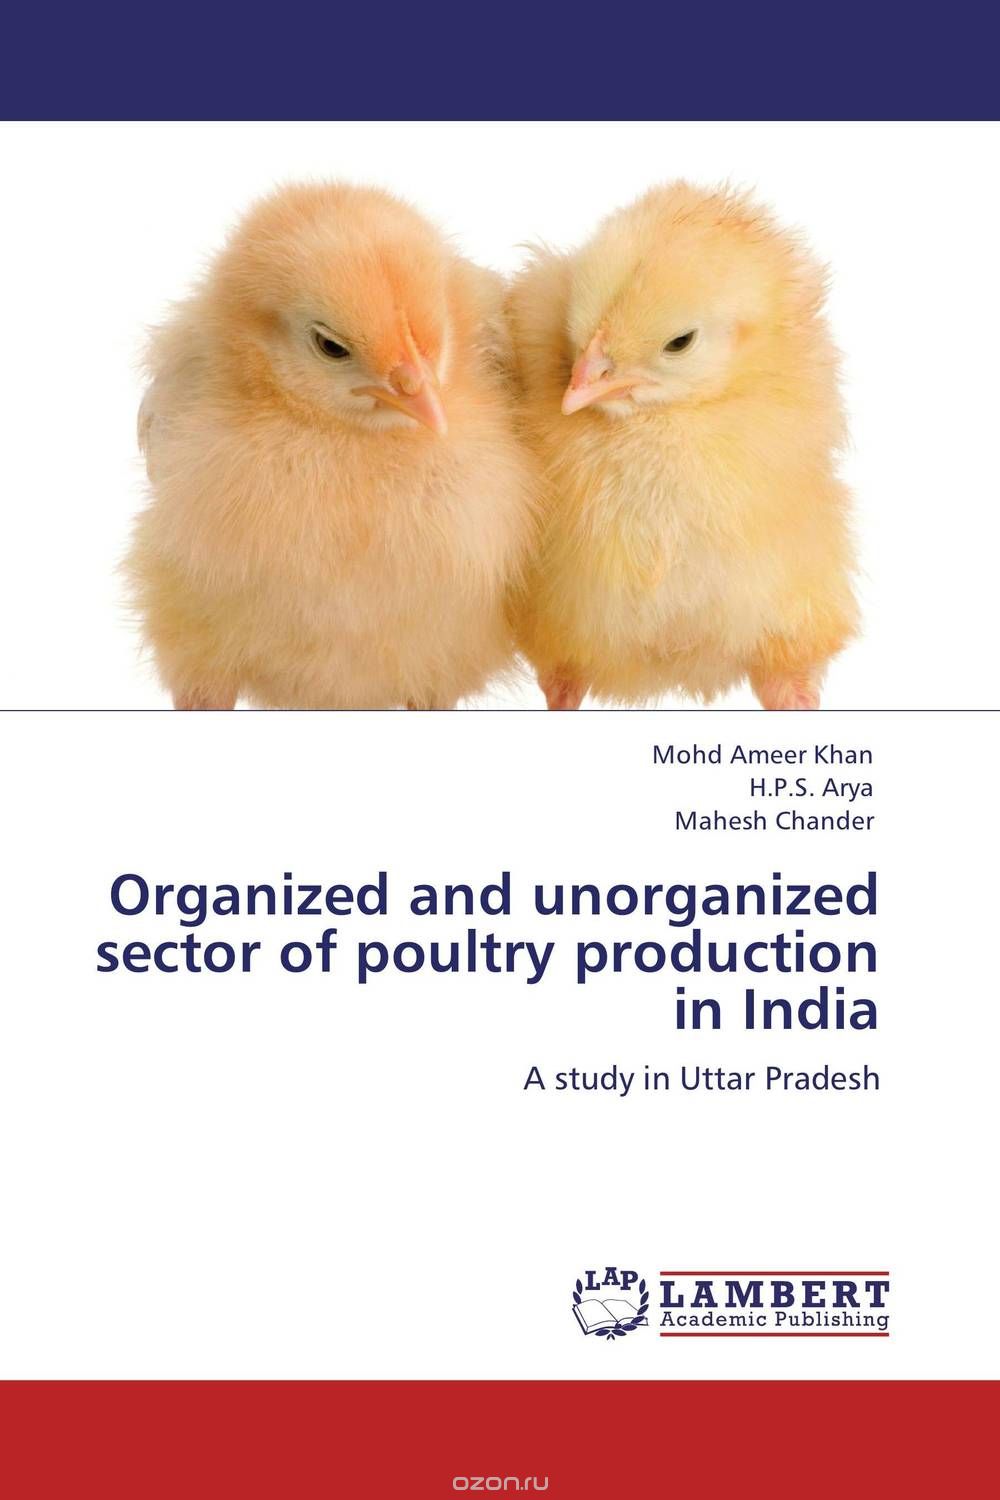 Organized and unorganized sector of  poultry production in India